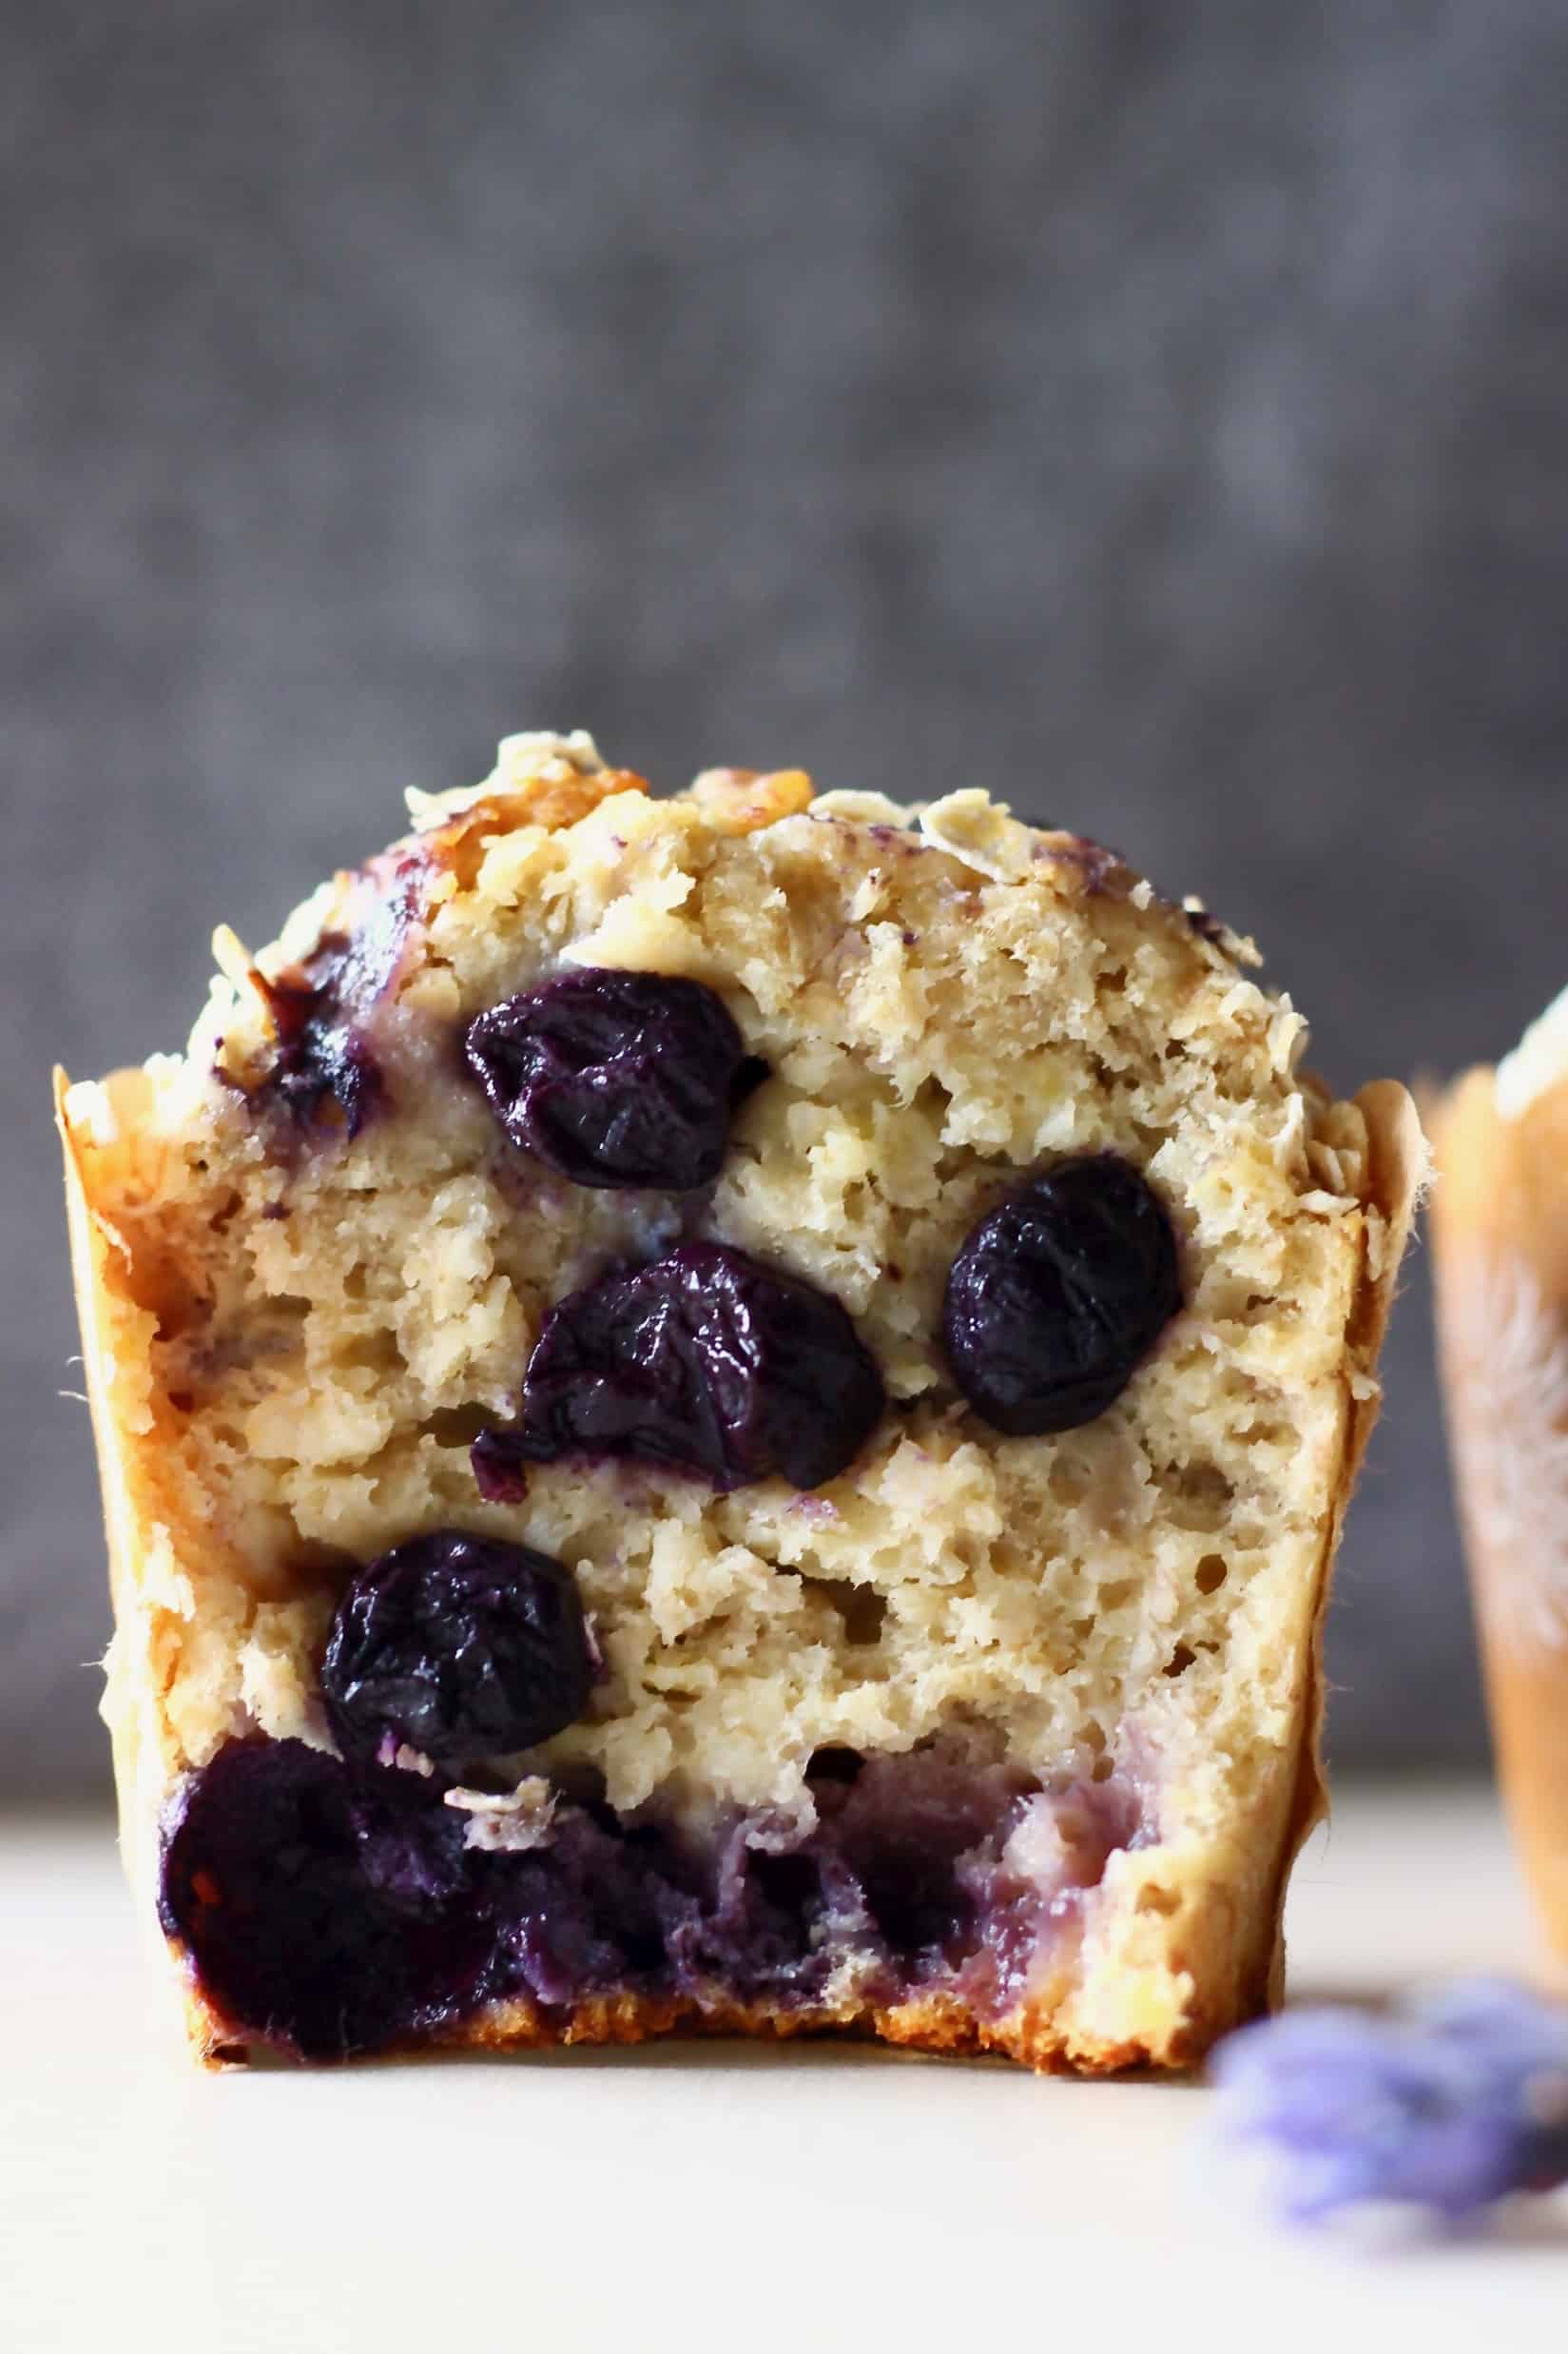 A halved gluten-free vegan blueberry oatmeal muffin against a grey background